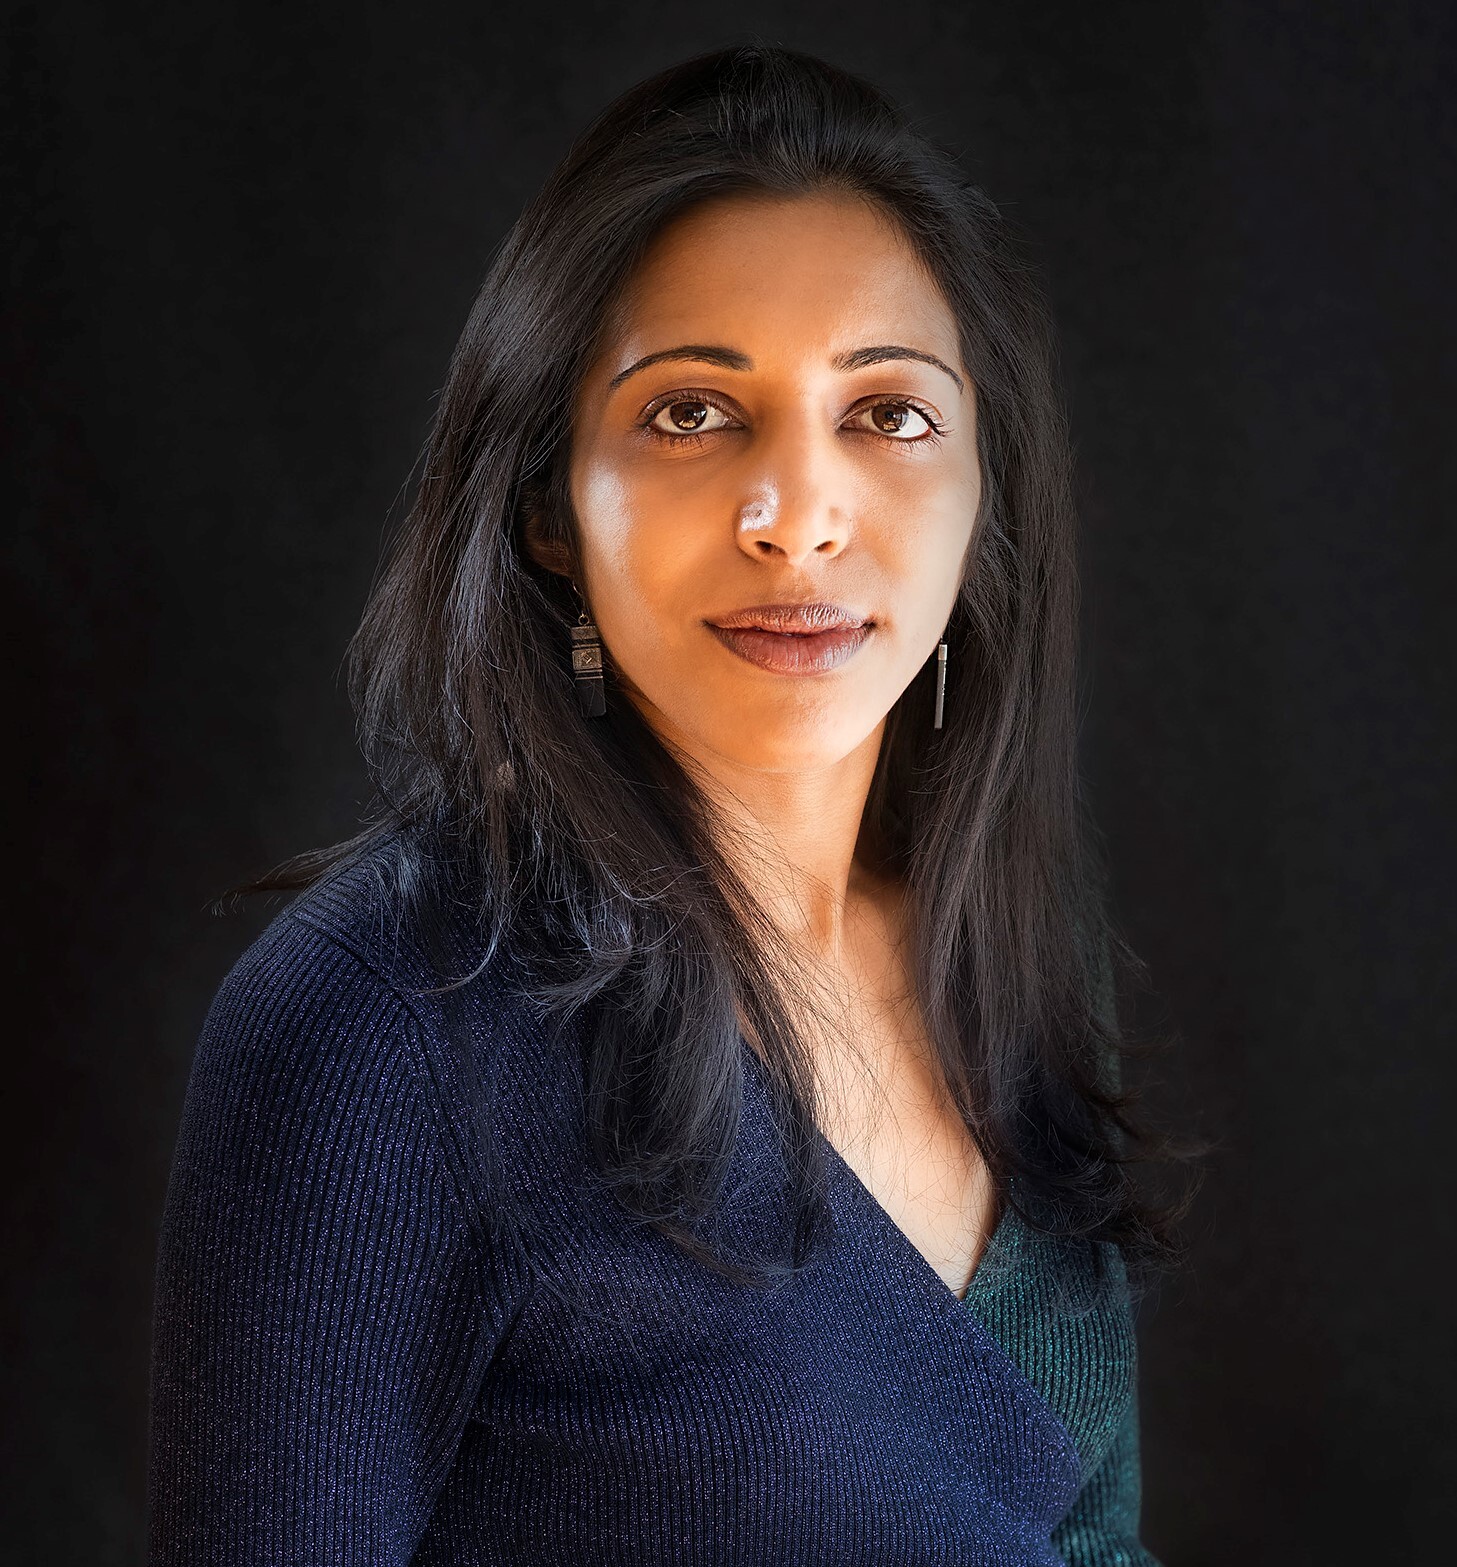 A picture of Vidhya Ramalingam in a dark blue and green jumper.